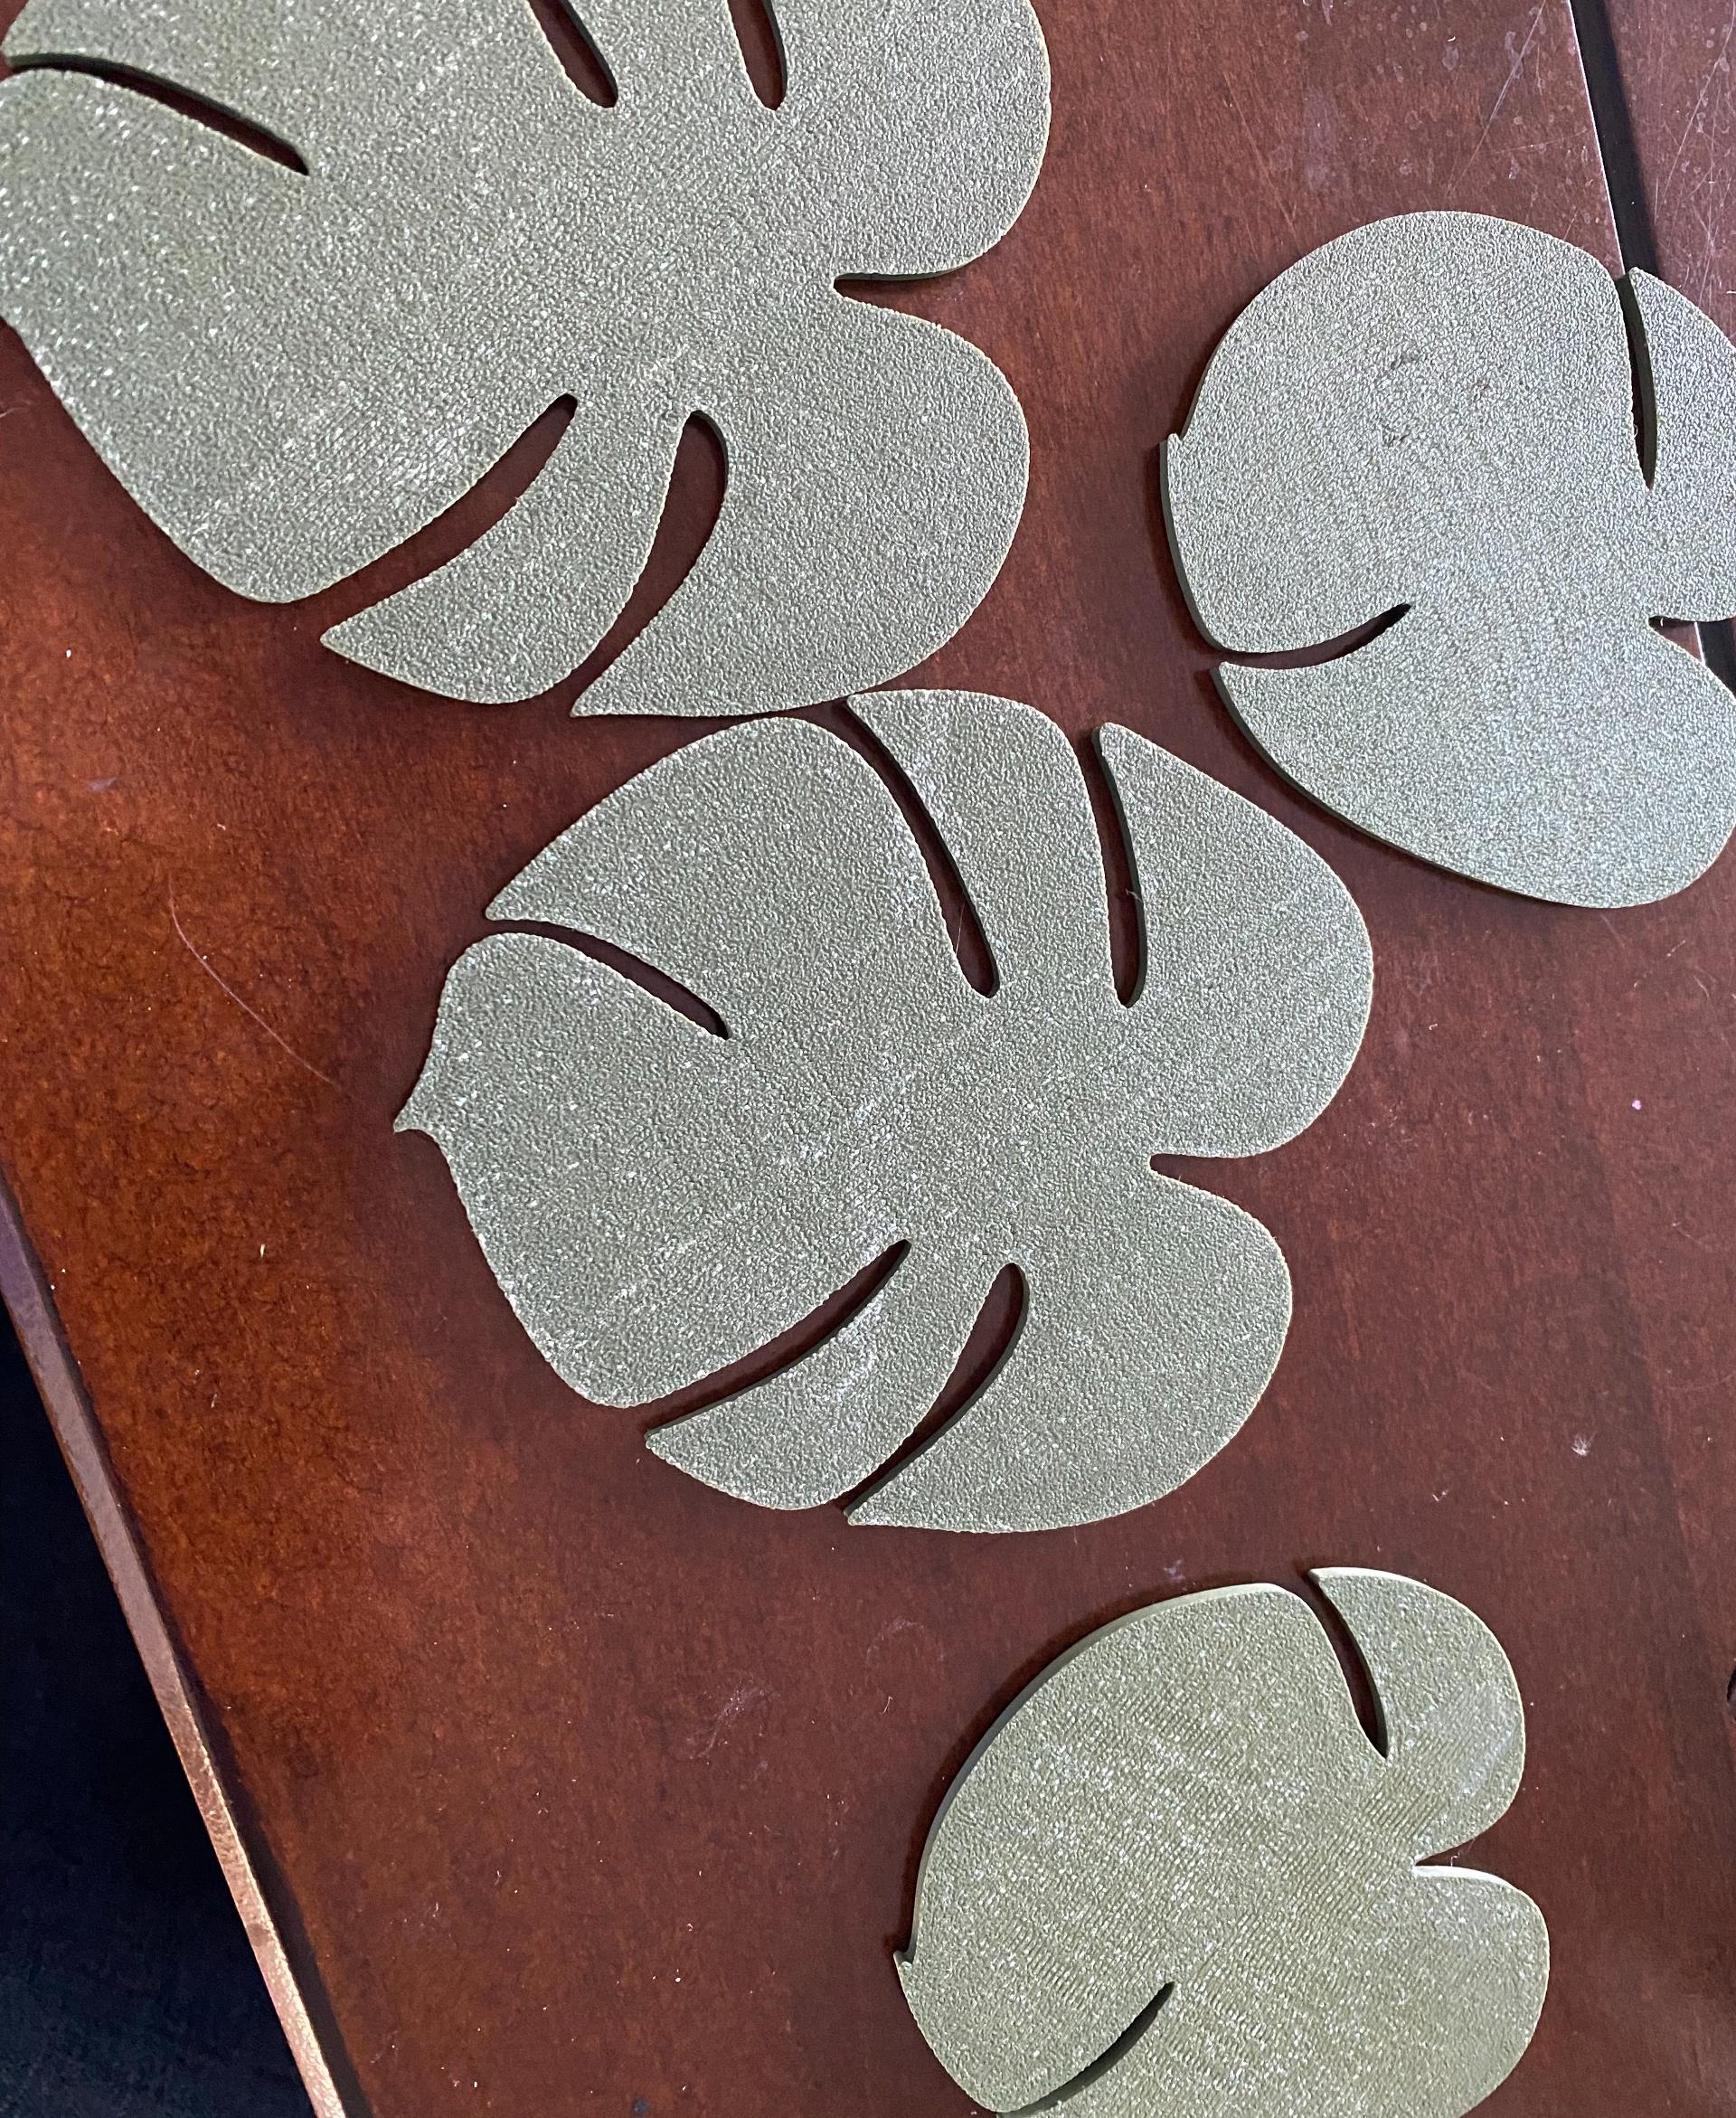 Monstera Coaster Set - Im using the recommended green matte filament, but my prints are coming out with some white spots. Has anyone seen this or have an idea on how to correct it? - 3d model